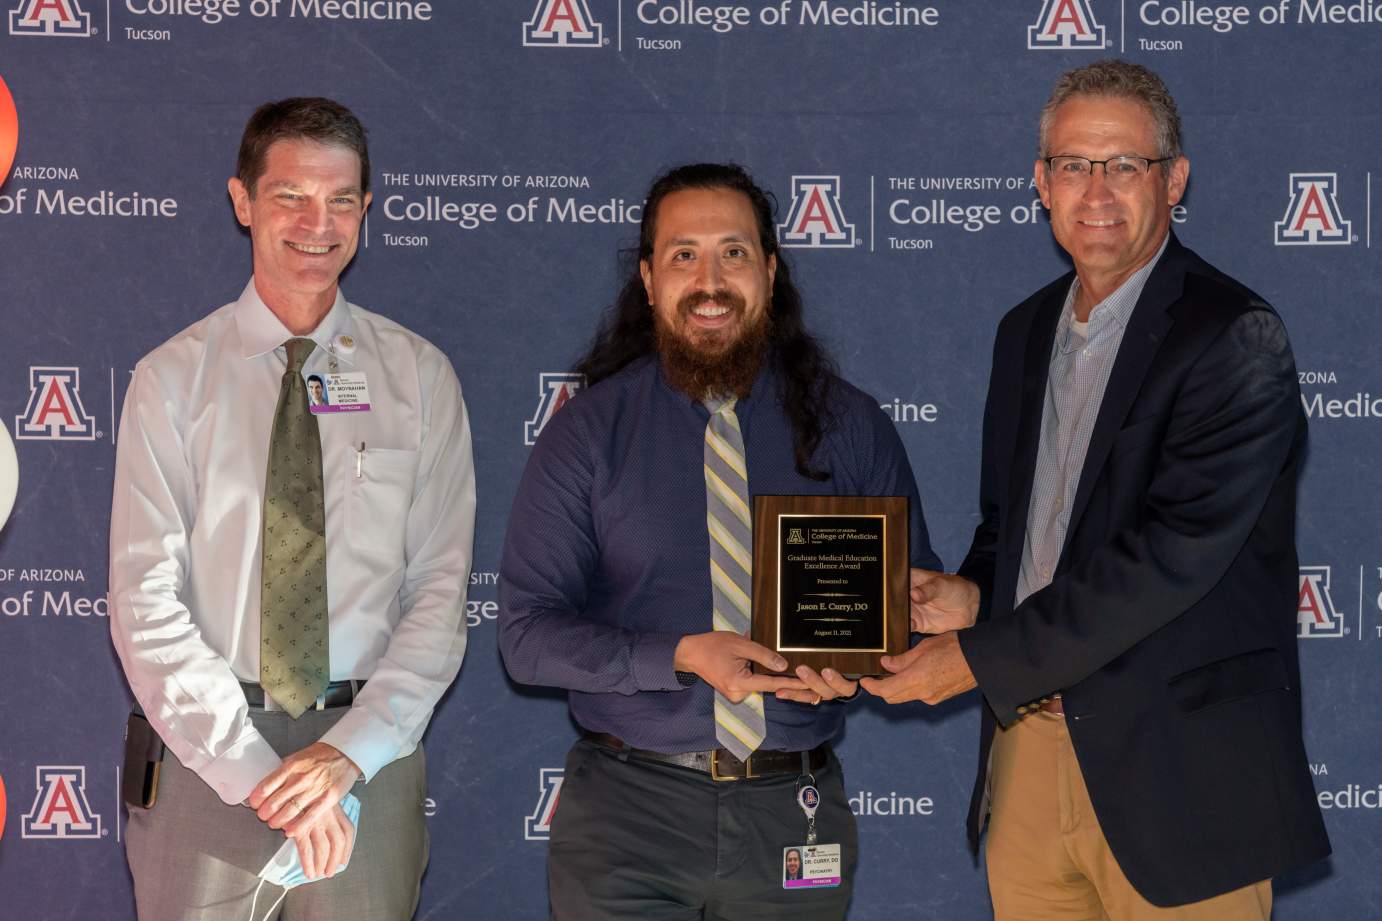 [Dr. Jason Curry is presented with the Award for Excellence in Graduate Medical Education by Dr. Kevin Moynahan and Dr. Conrad Clemens.]